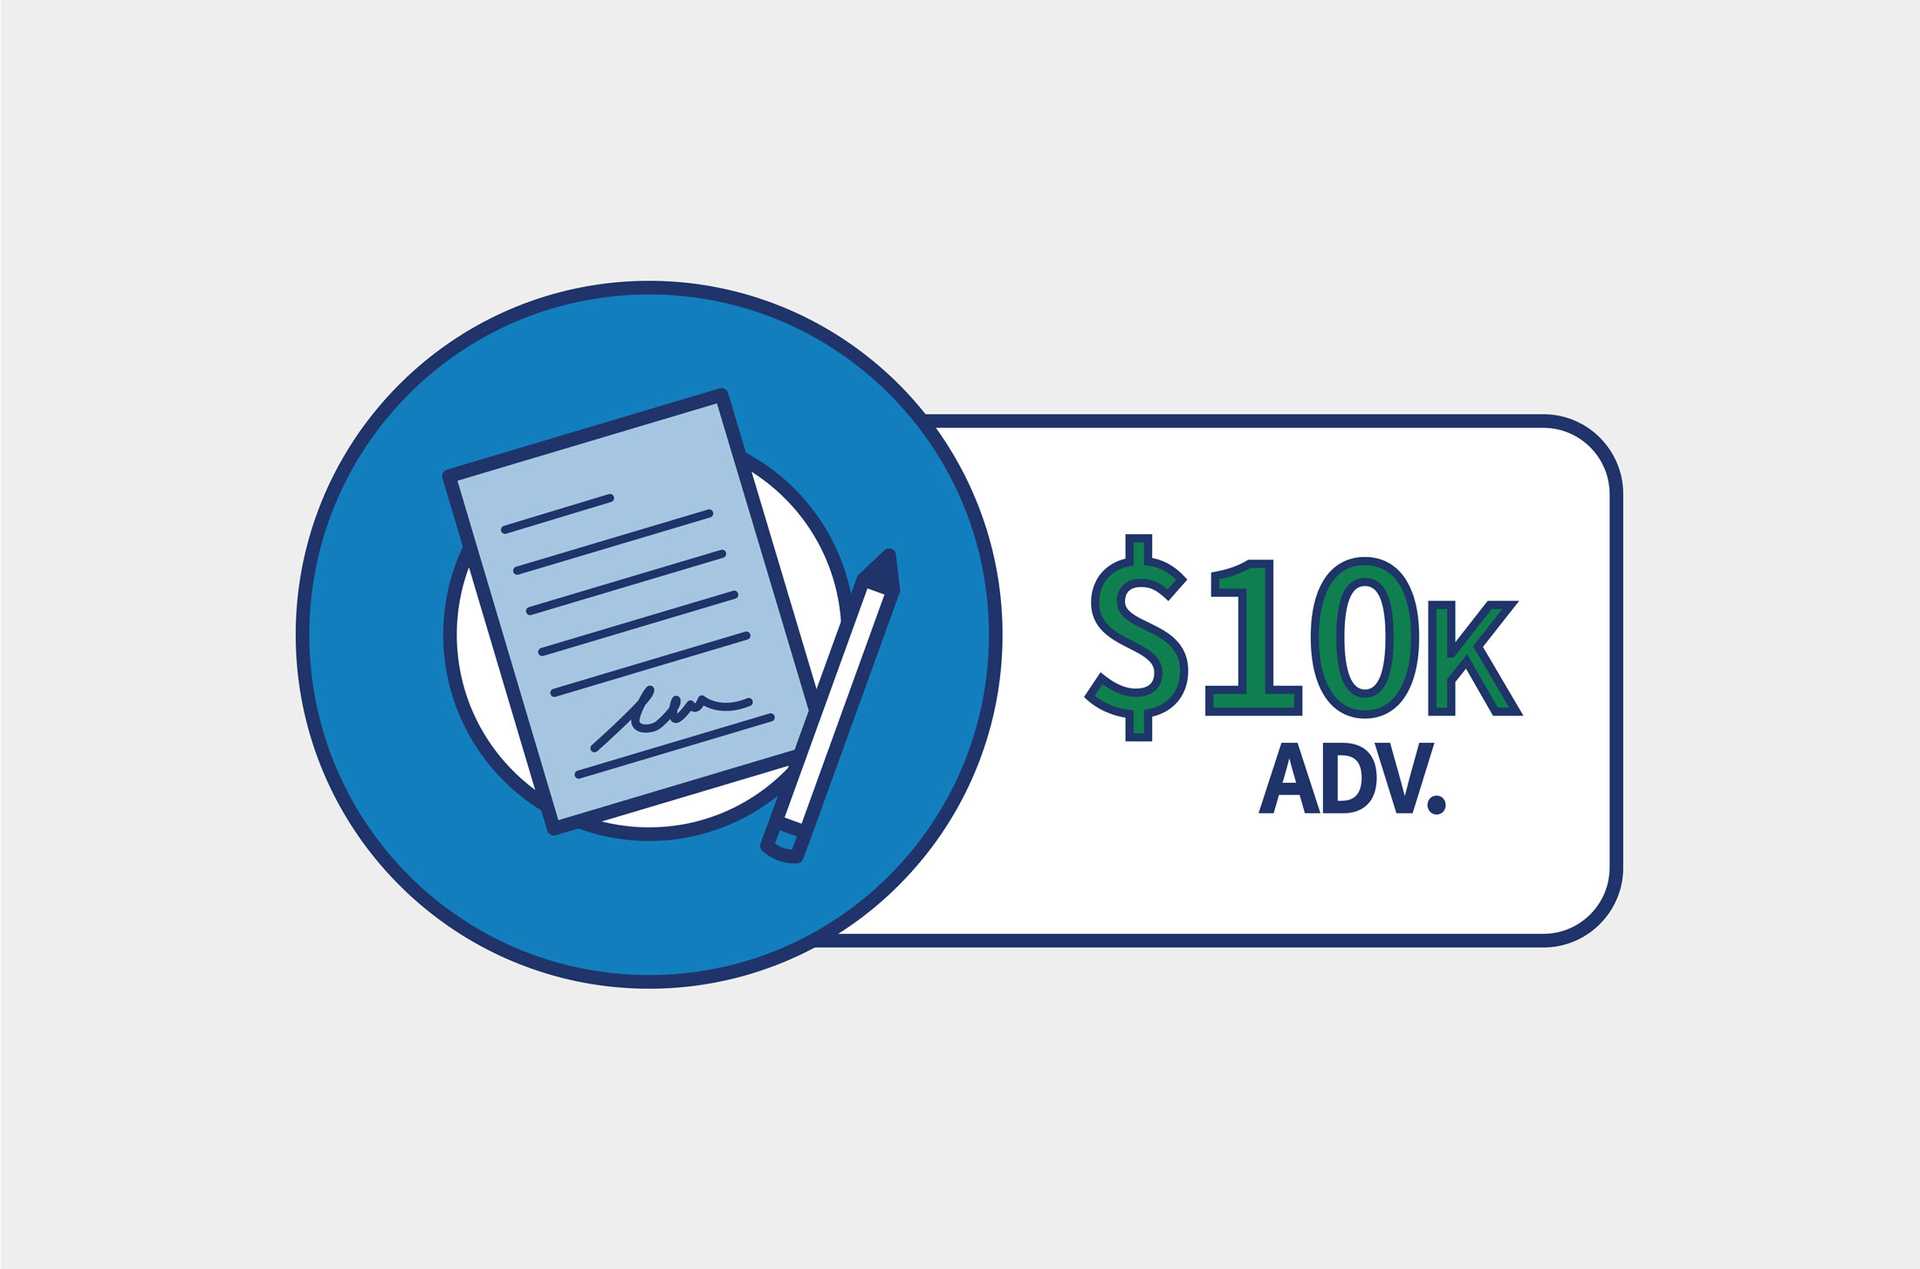 A card showing a page and a pencil and the words '$10k ADV.'